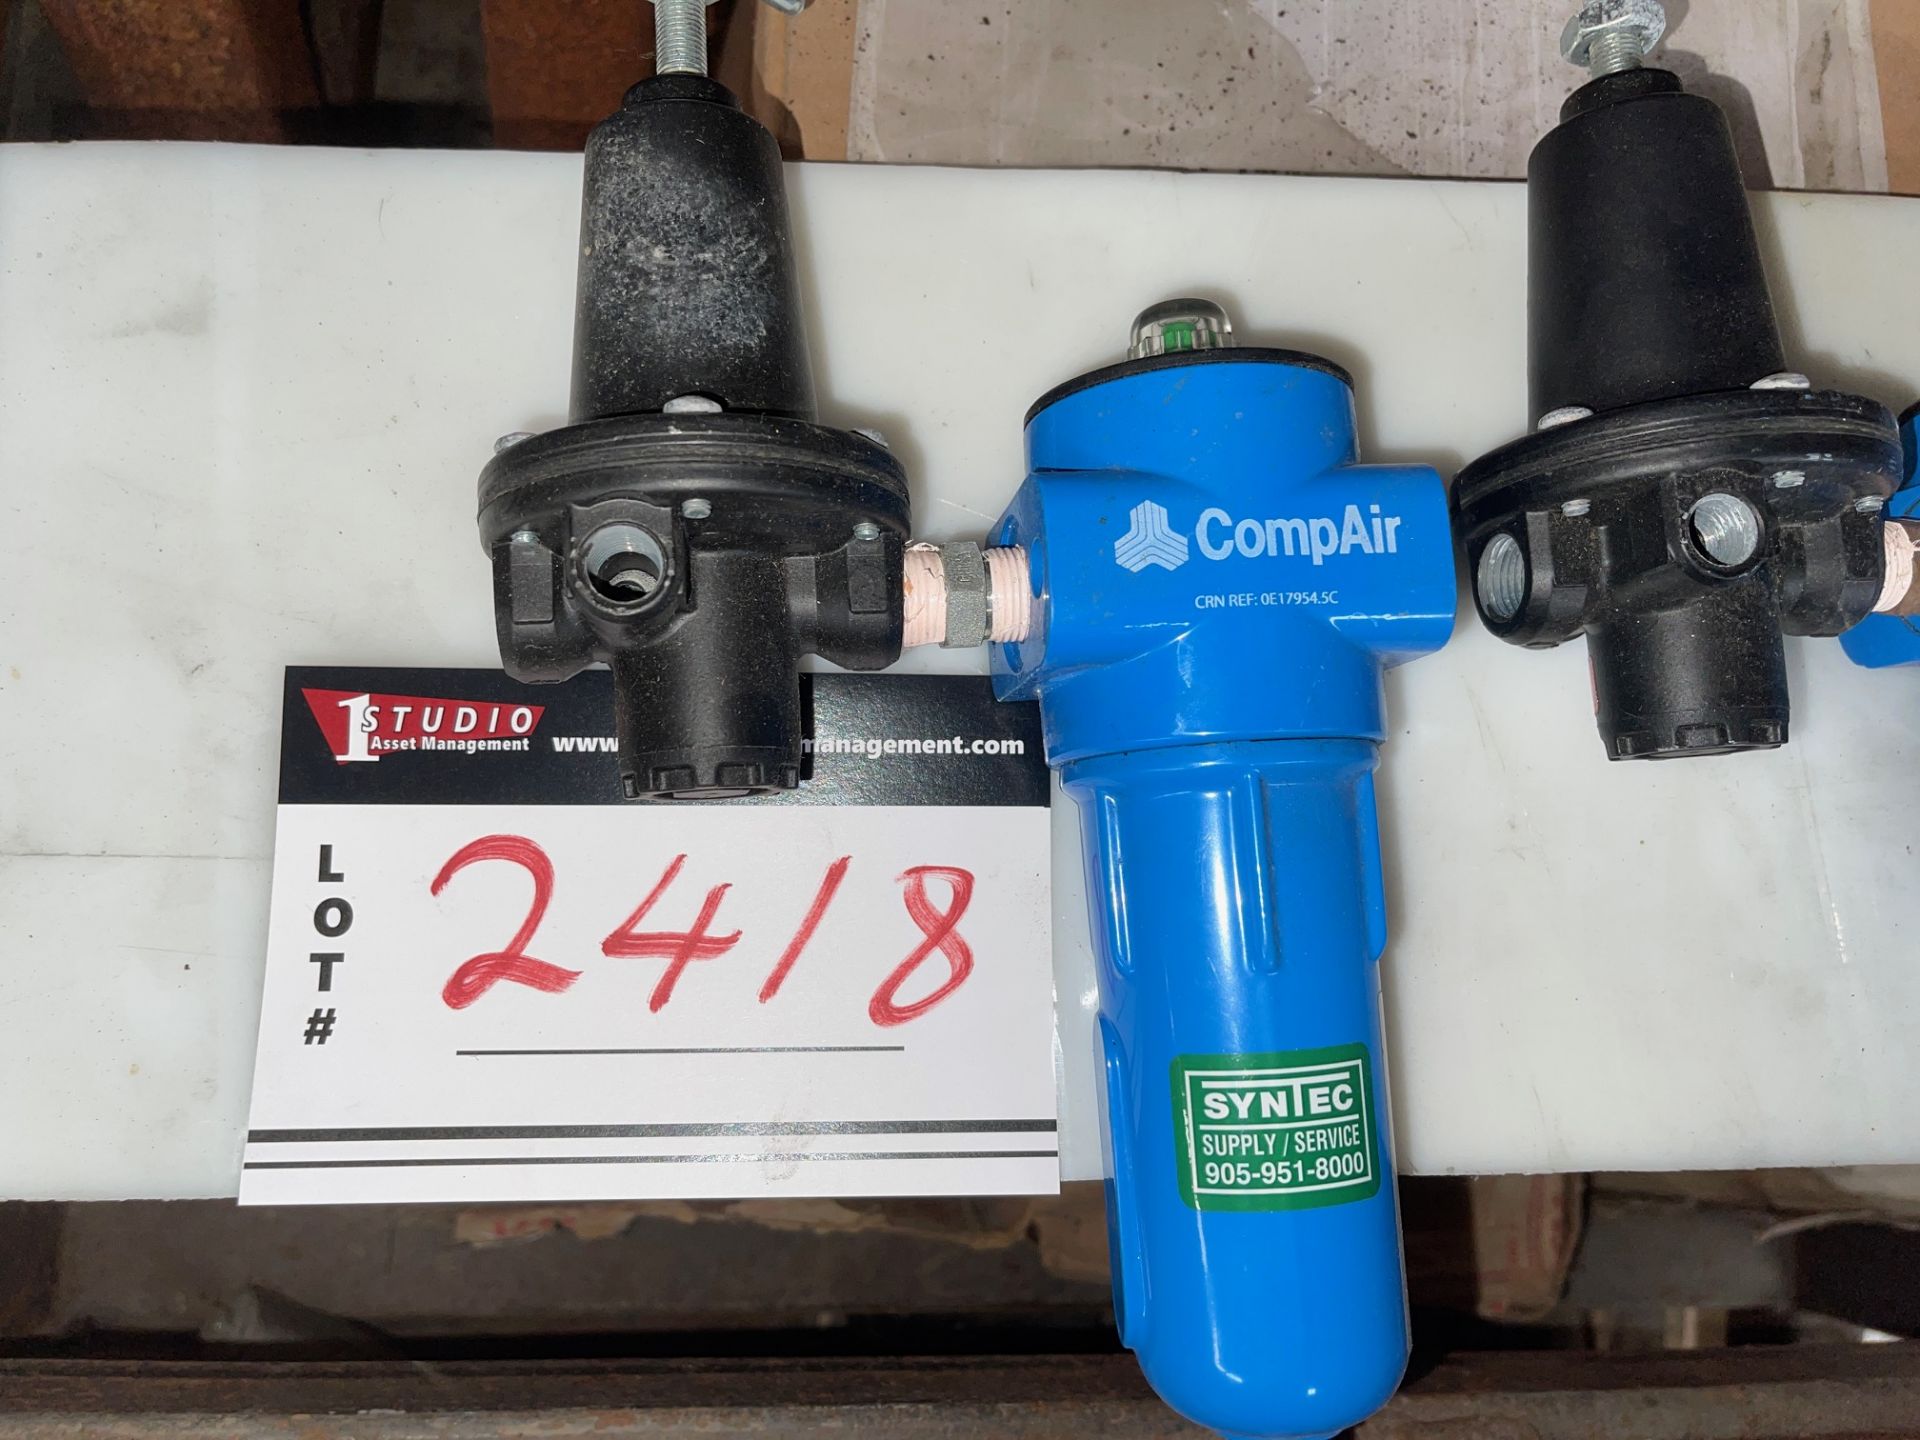 LOT/COMP AIR: AIR WATER SEPARATOR W/PARKER REGULATOR, MAX 300PSI WITH GAUGES(3) SETS - Image 4 of 4